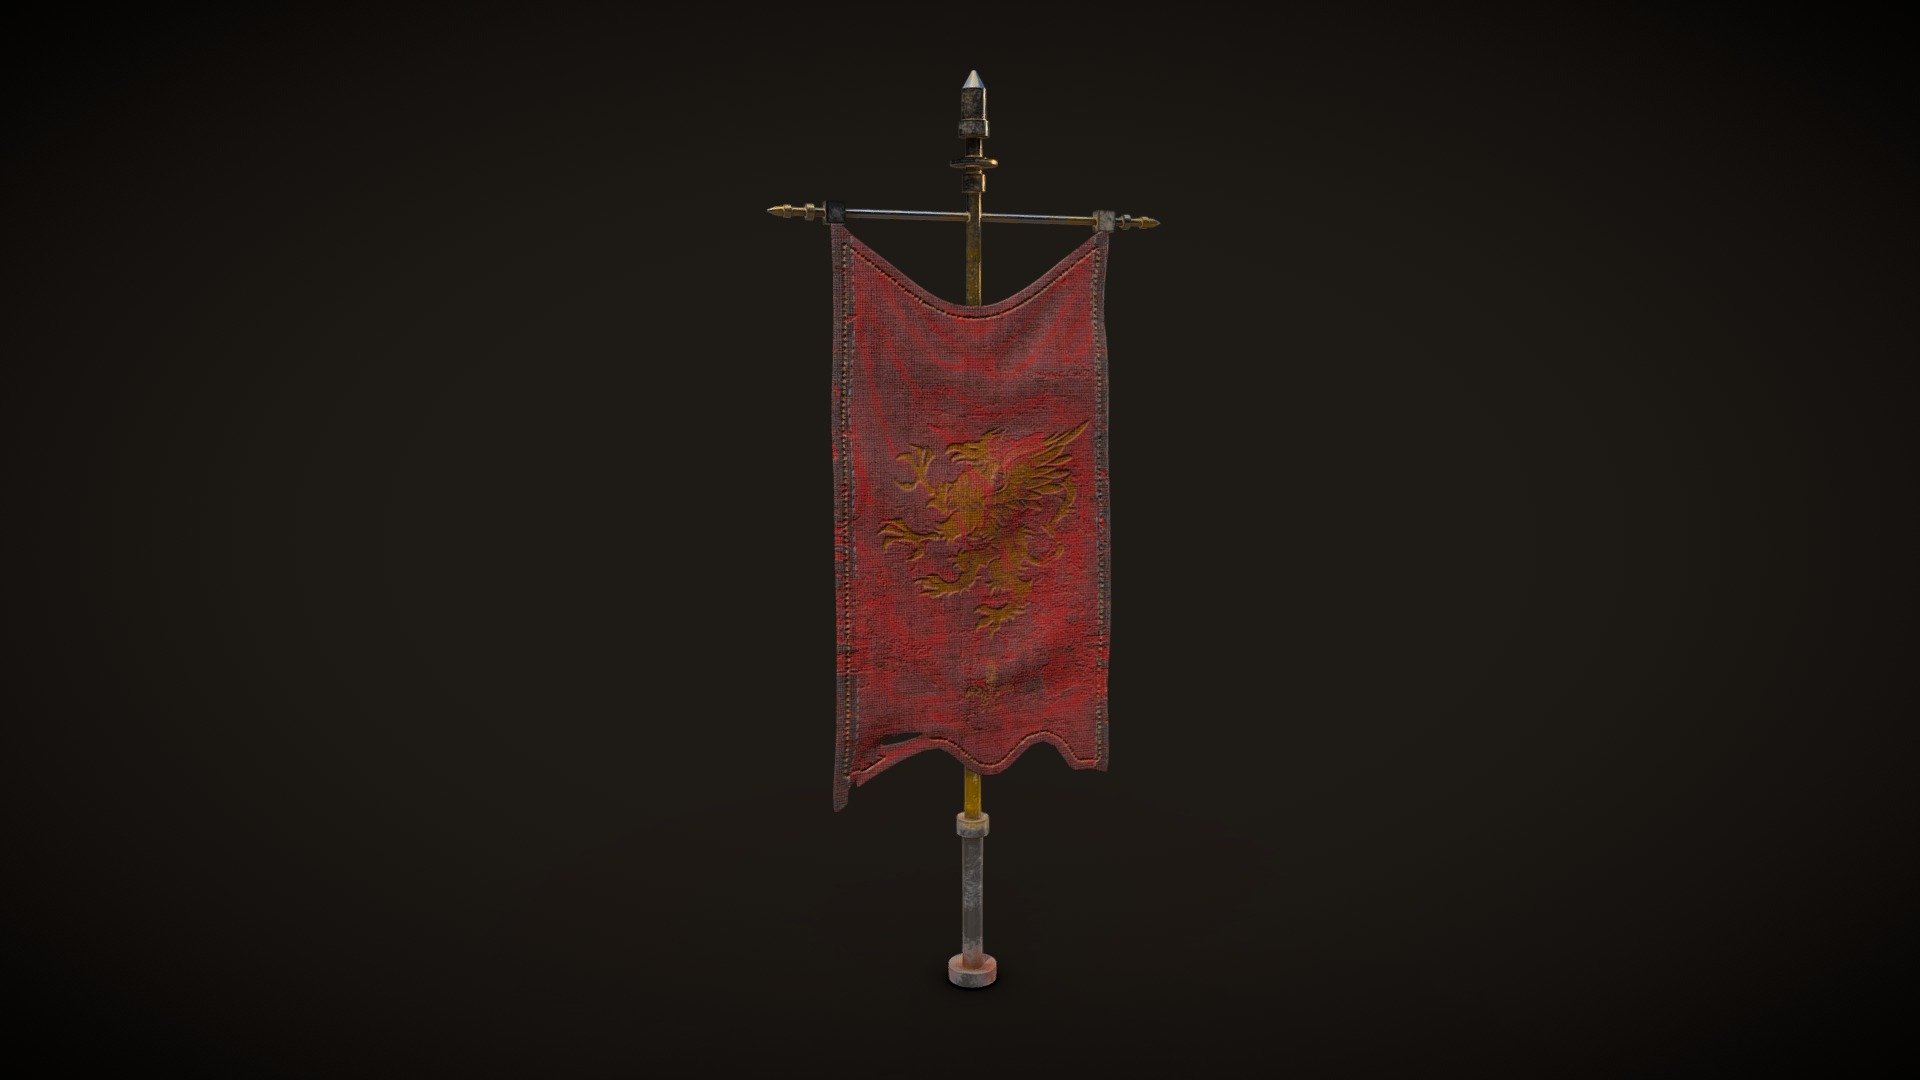 4,481 Medieval Gaming Flag Images, Stock Photos, 3D objects, & Vectors